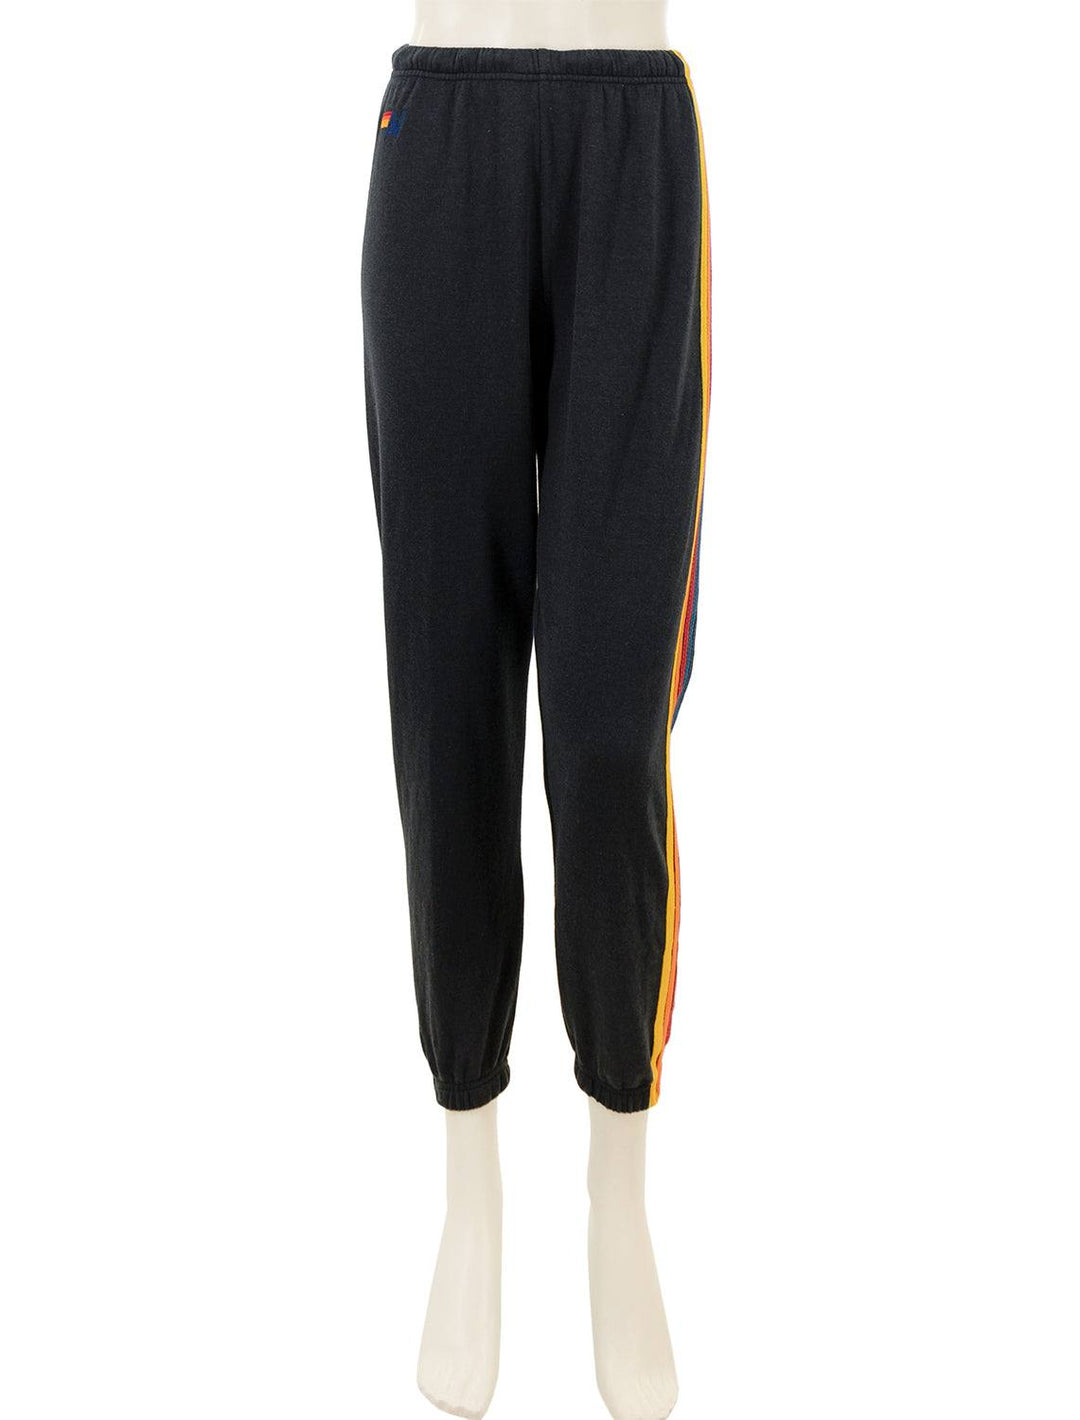 Front view of Aviator Nation's 5 stripe womens sweatpants in charcoal.